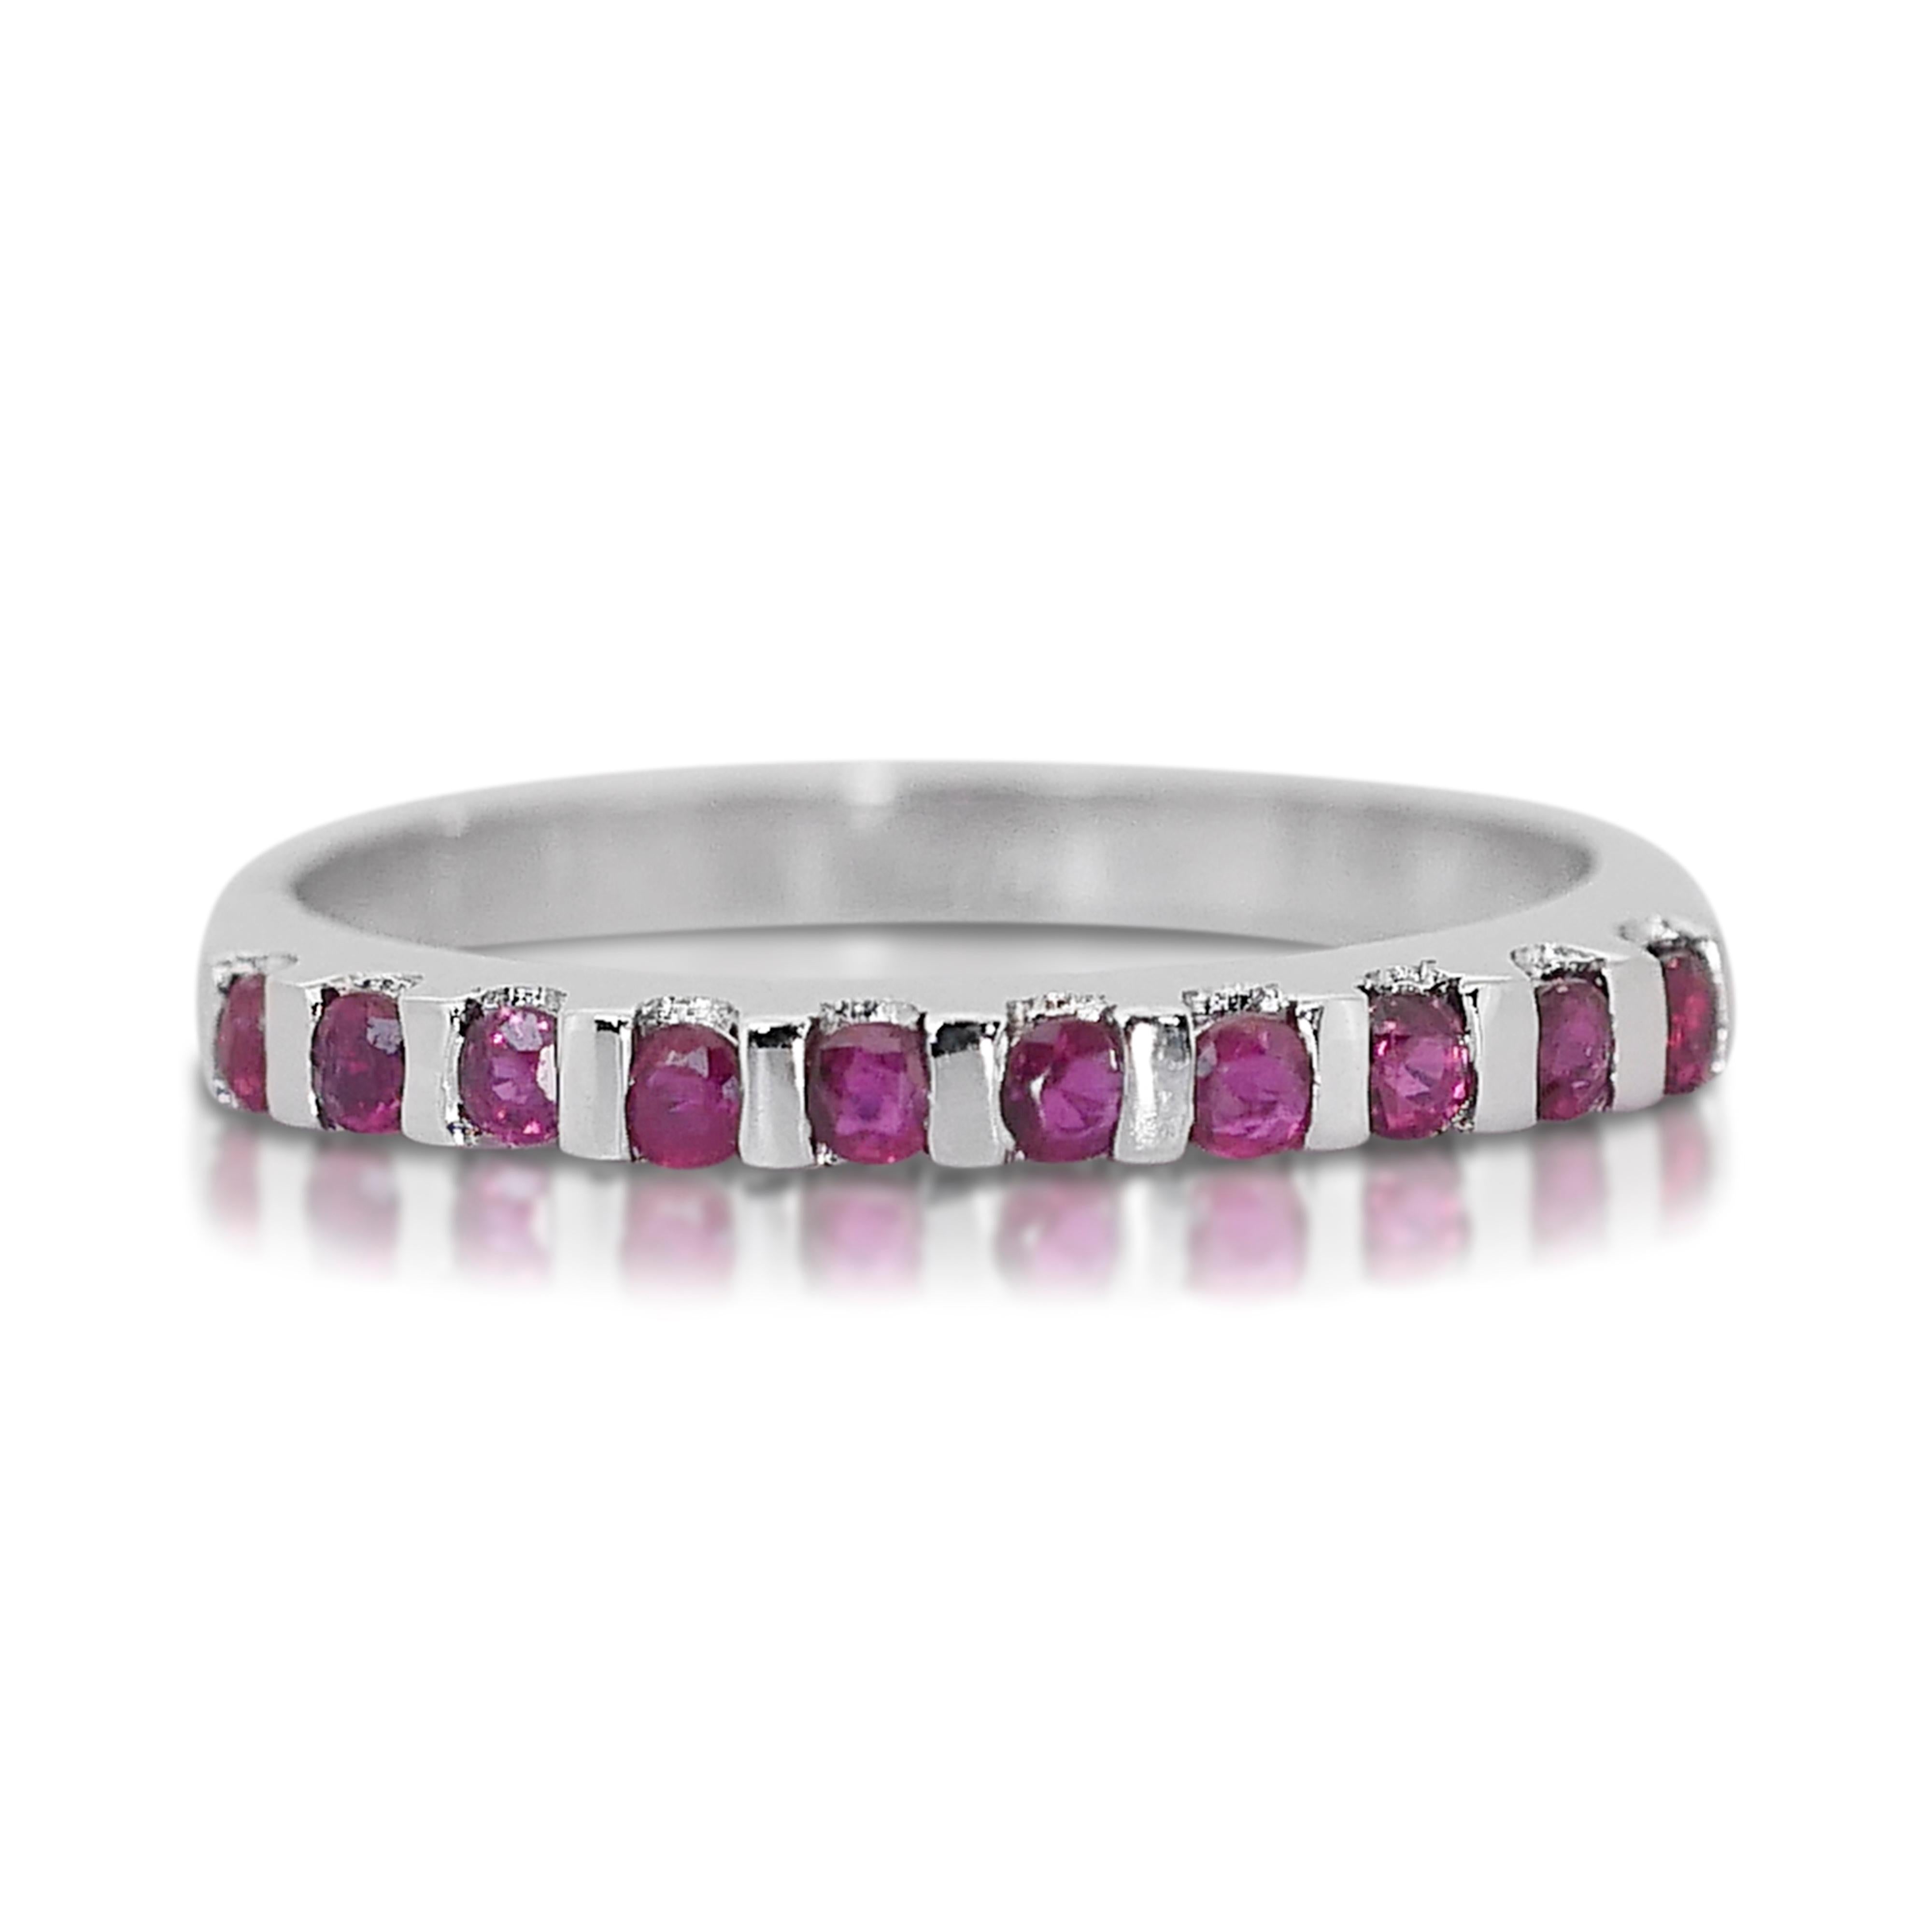 Dazzling 1.22 ct Emerald, Sapphire, Ruby, & Diamond Band Rings in 14k White Gold For Sale 7